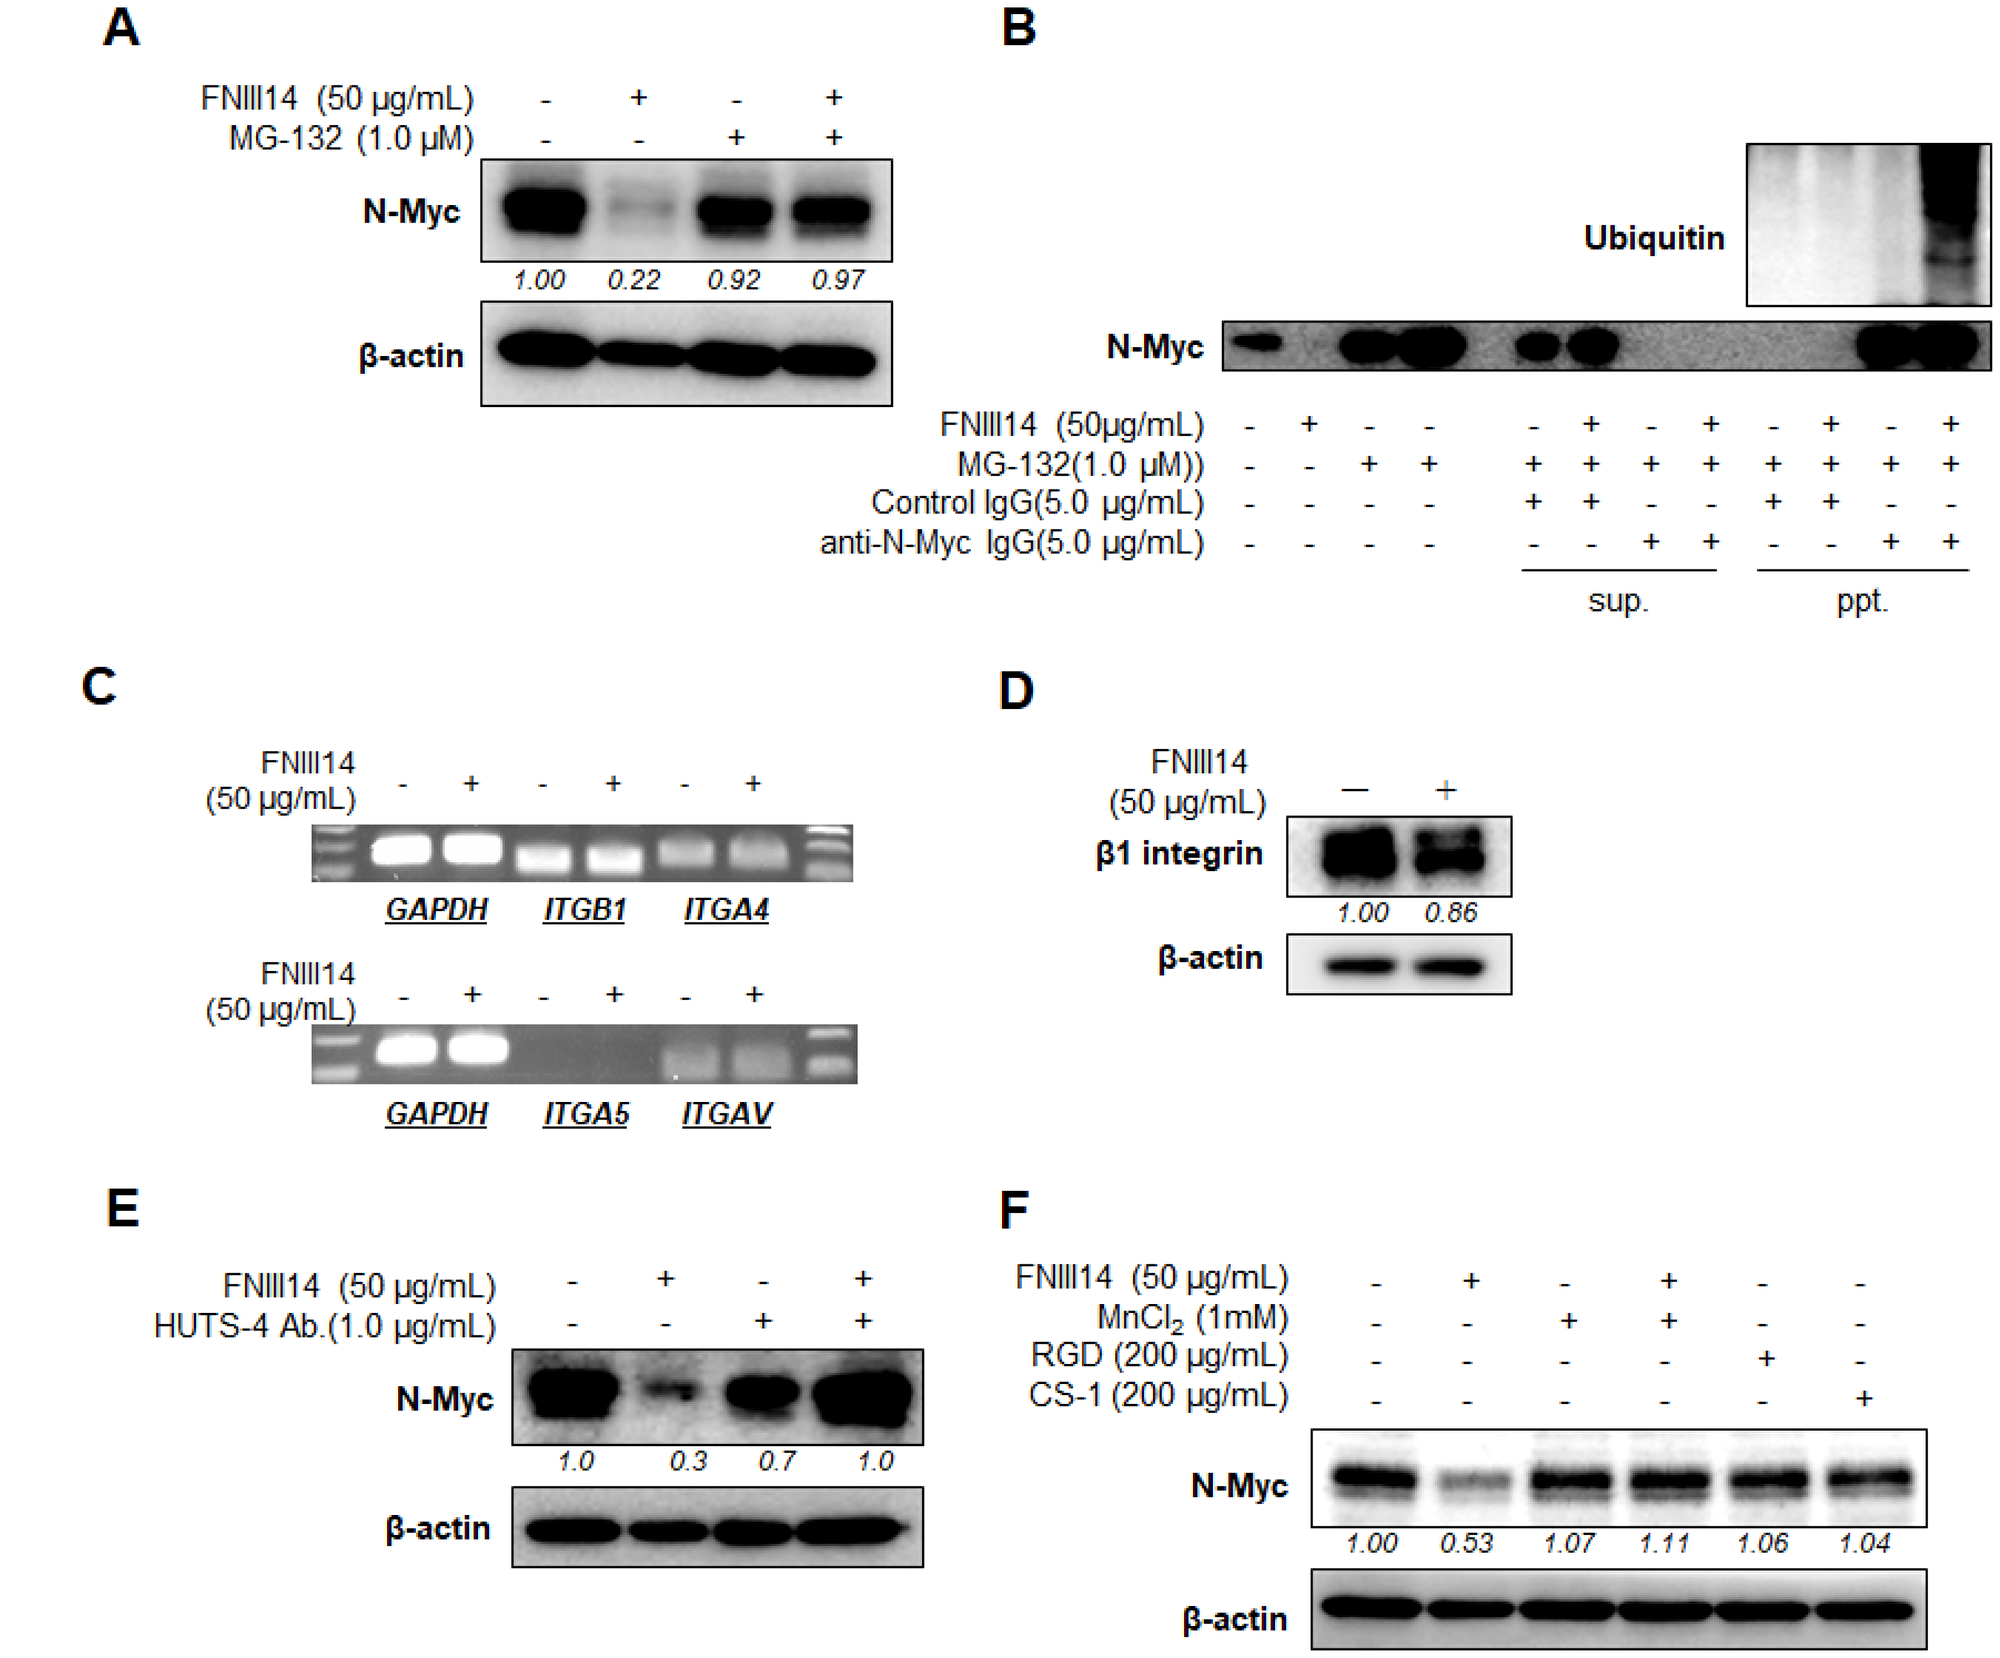 FNIII14 induces proteasomal degradation of N-Myc protein through inactivation of β1-integrins.